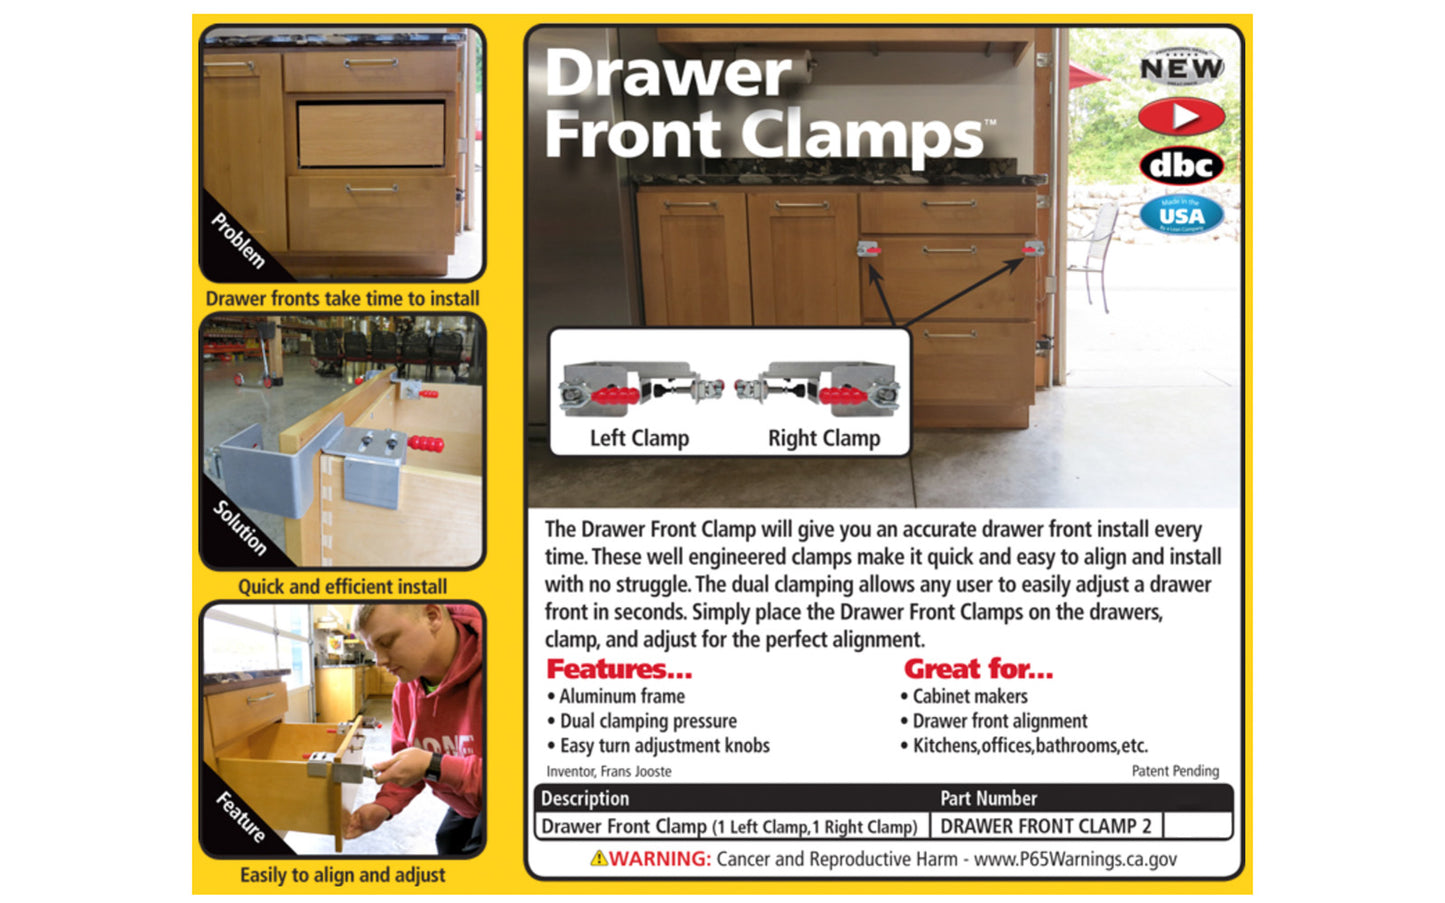 FastCap Drawer Front Installation Clamp - Made in USA - Great for quick & efficient installation for drawers - Draw Front Clamps work great for Full overlay cabinets or Partial overlay cabinets